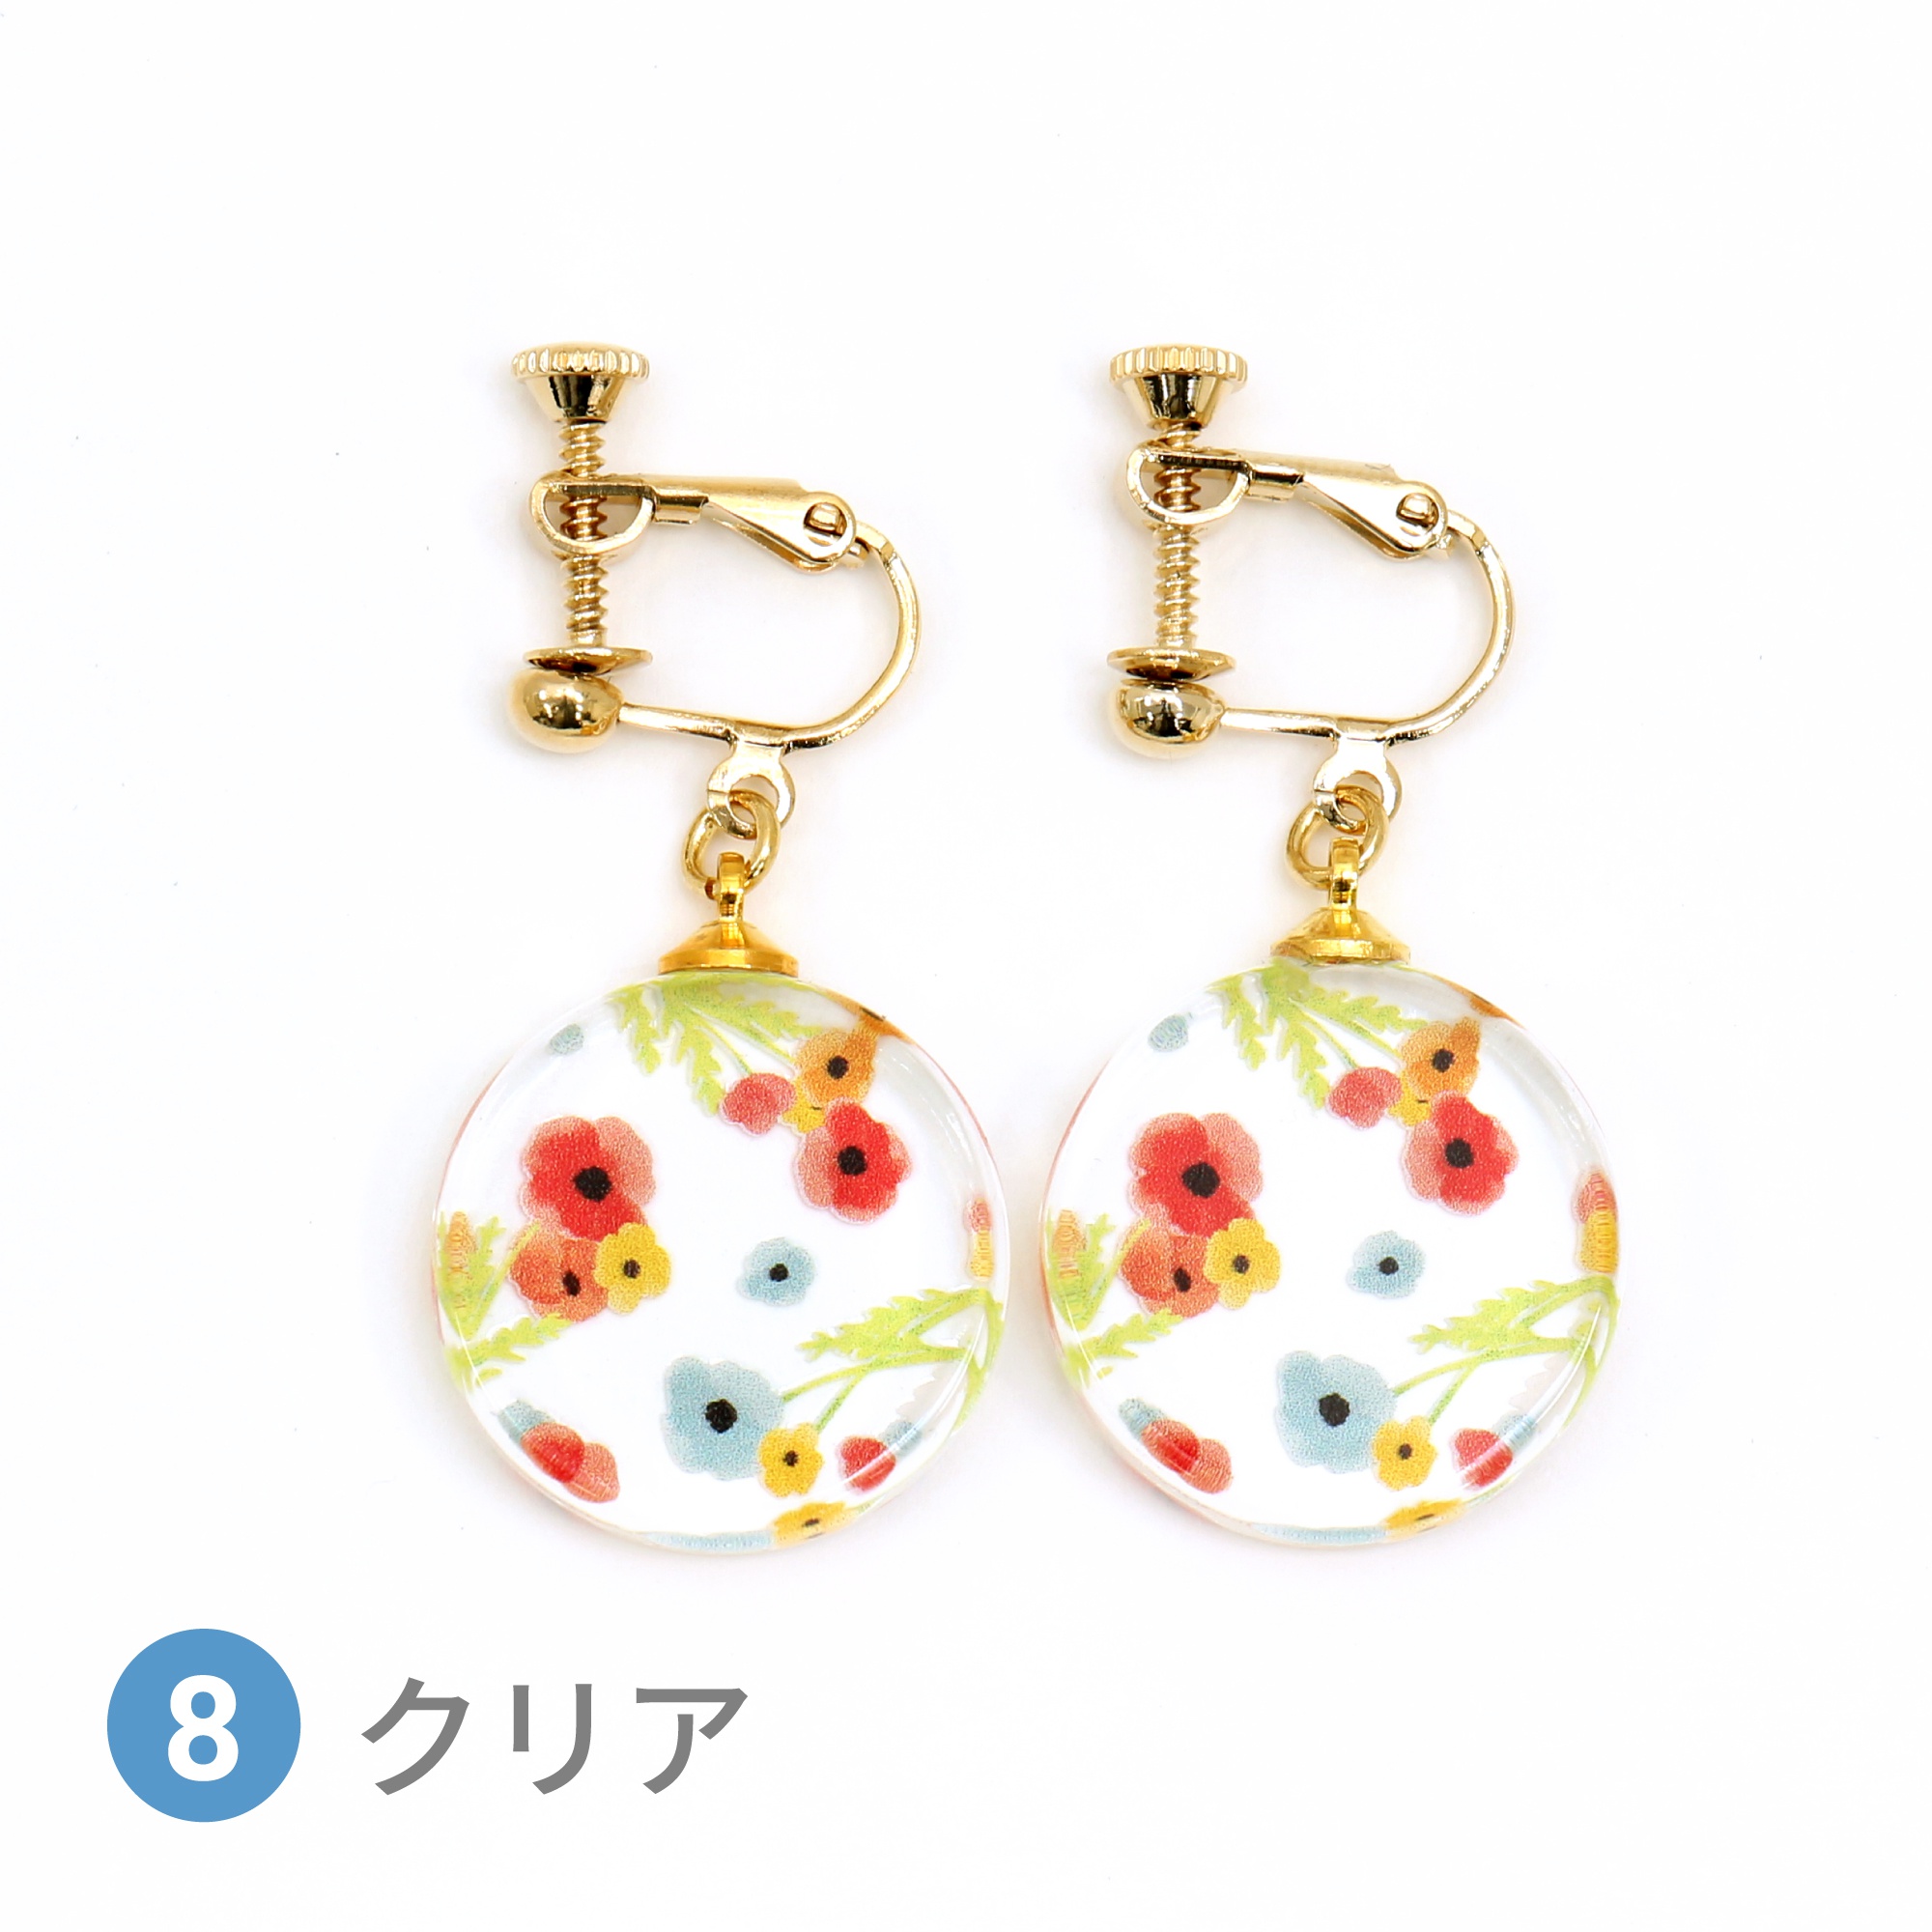 Glass accessories Earring POPPY clear round shape